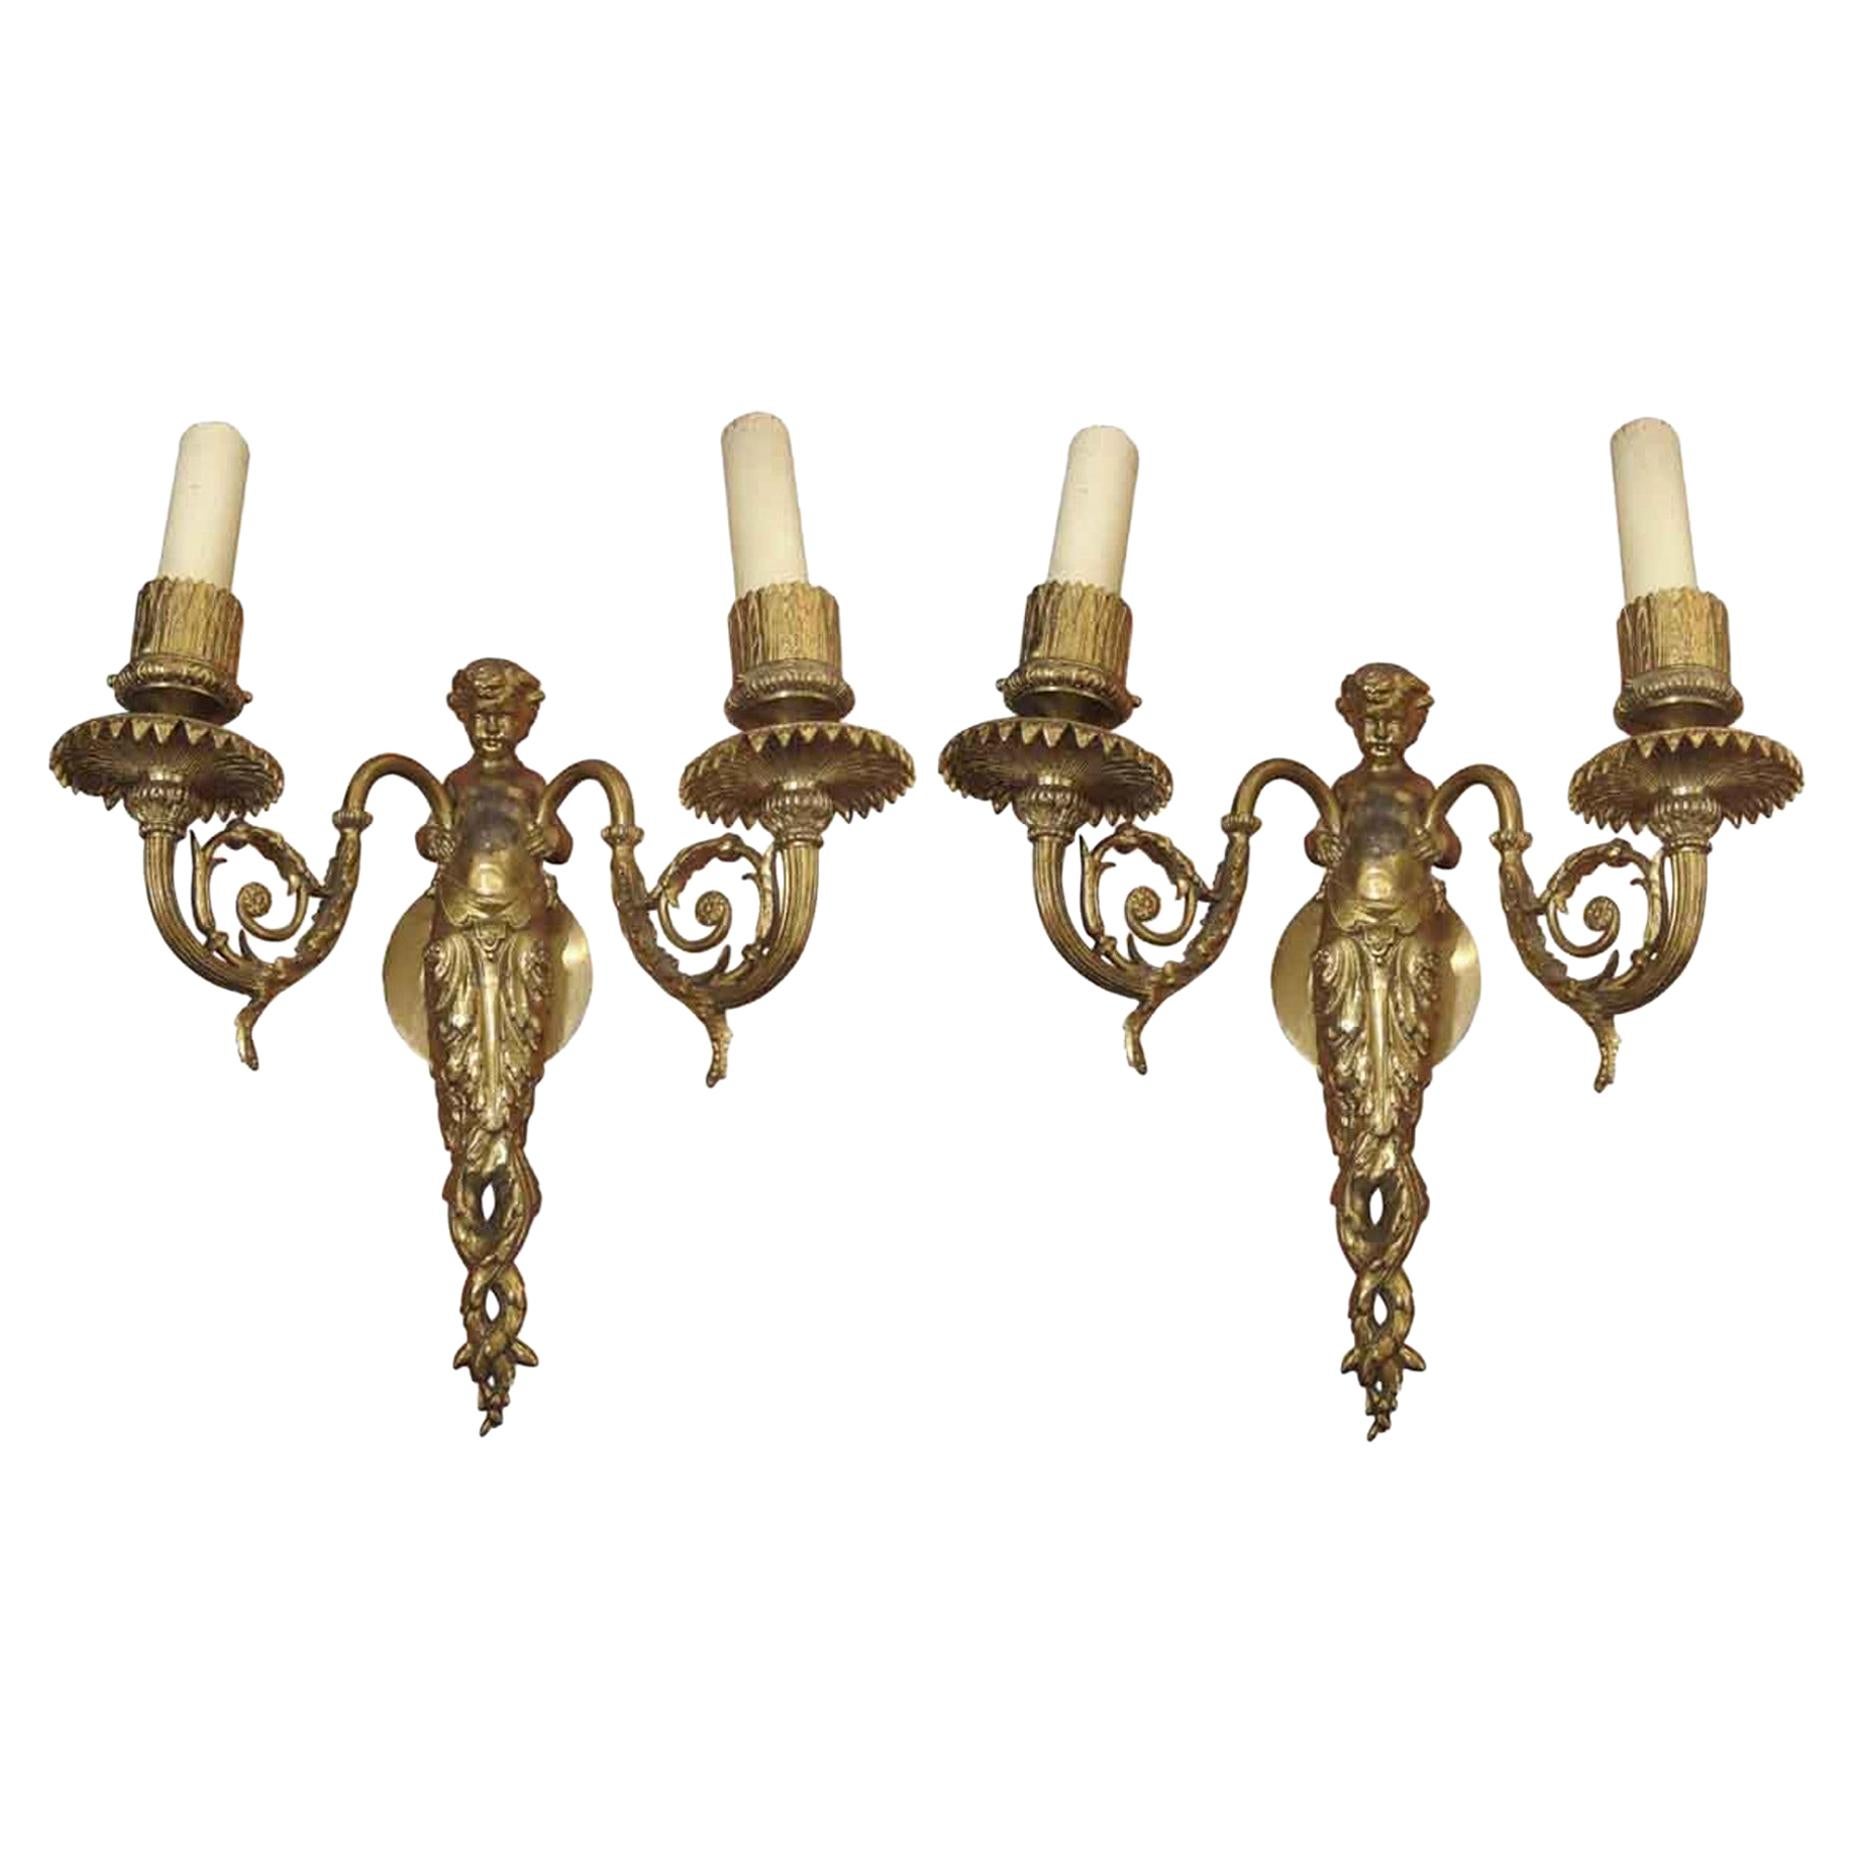 1920s Pair of Bronze Putti Sconces from an East 82nd St Apartment